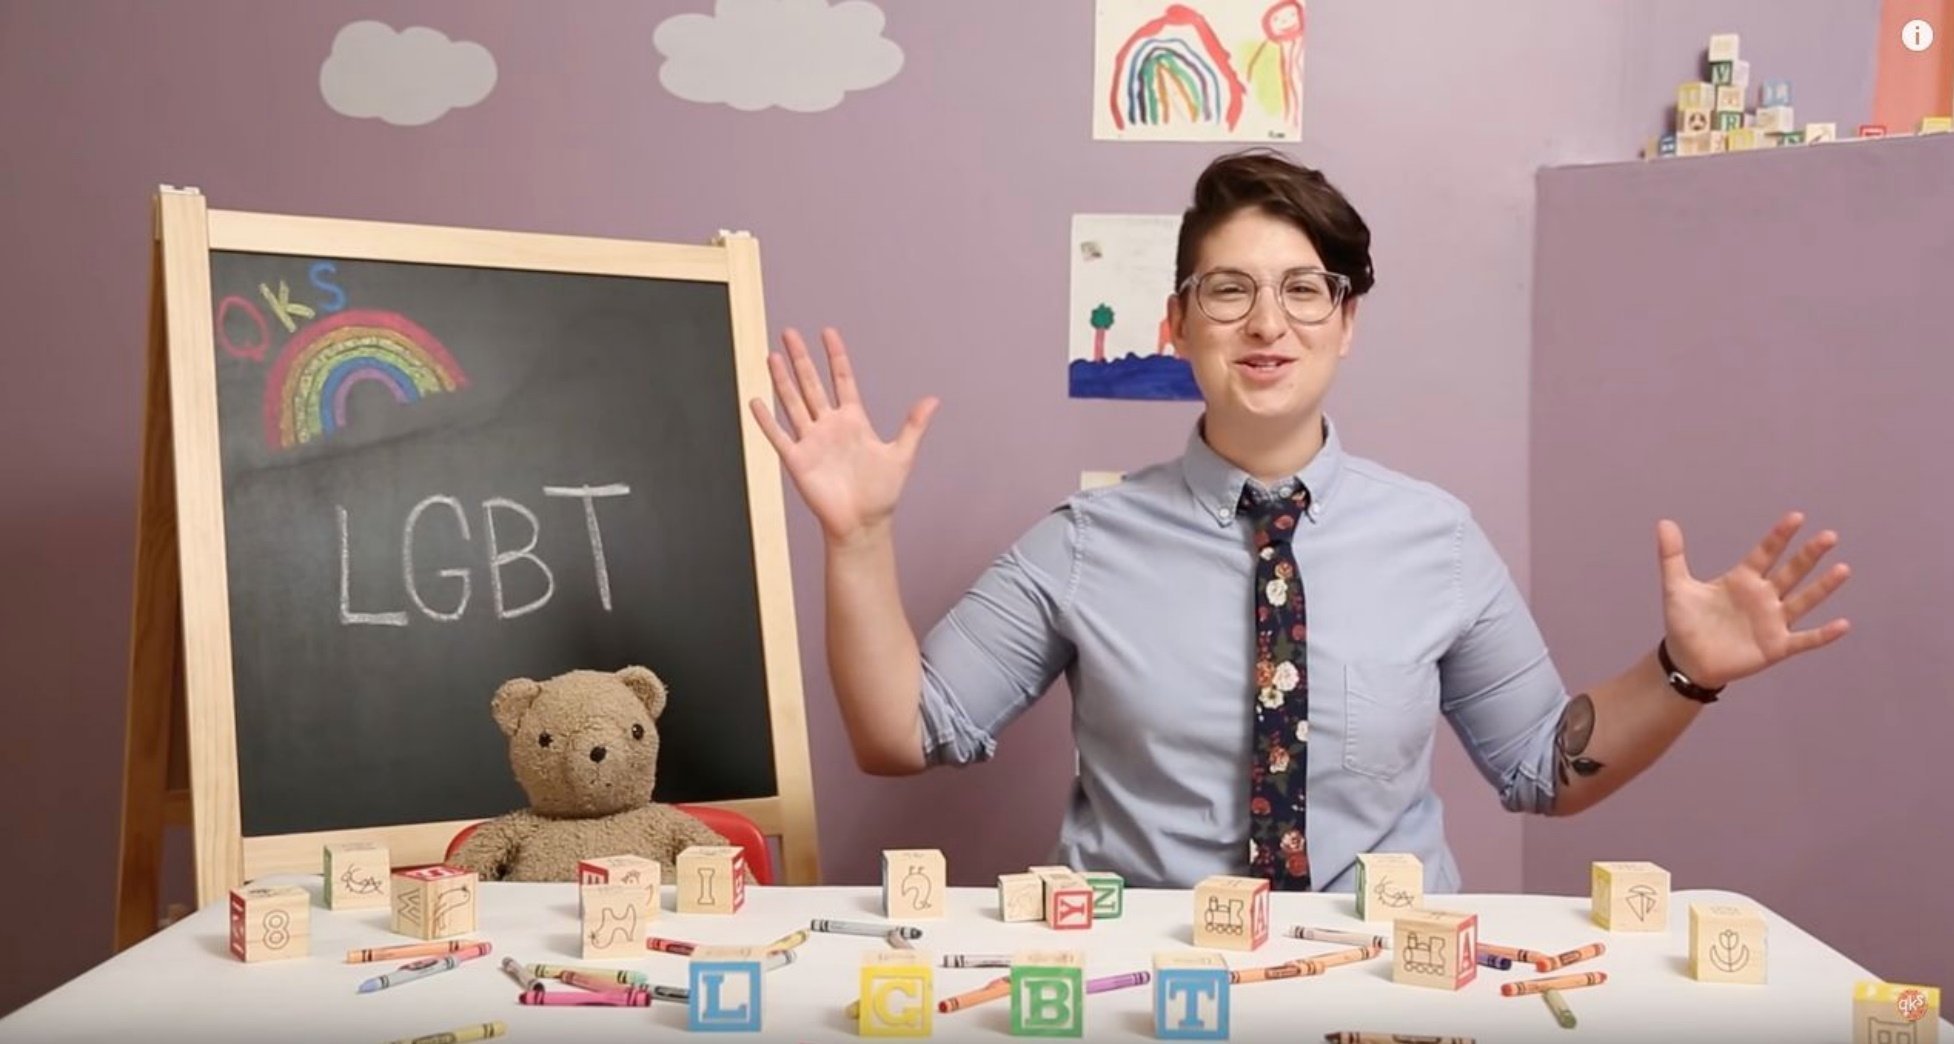 'Queer Kid Stuff' Teaches Kids About the LGBTQ+ Community